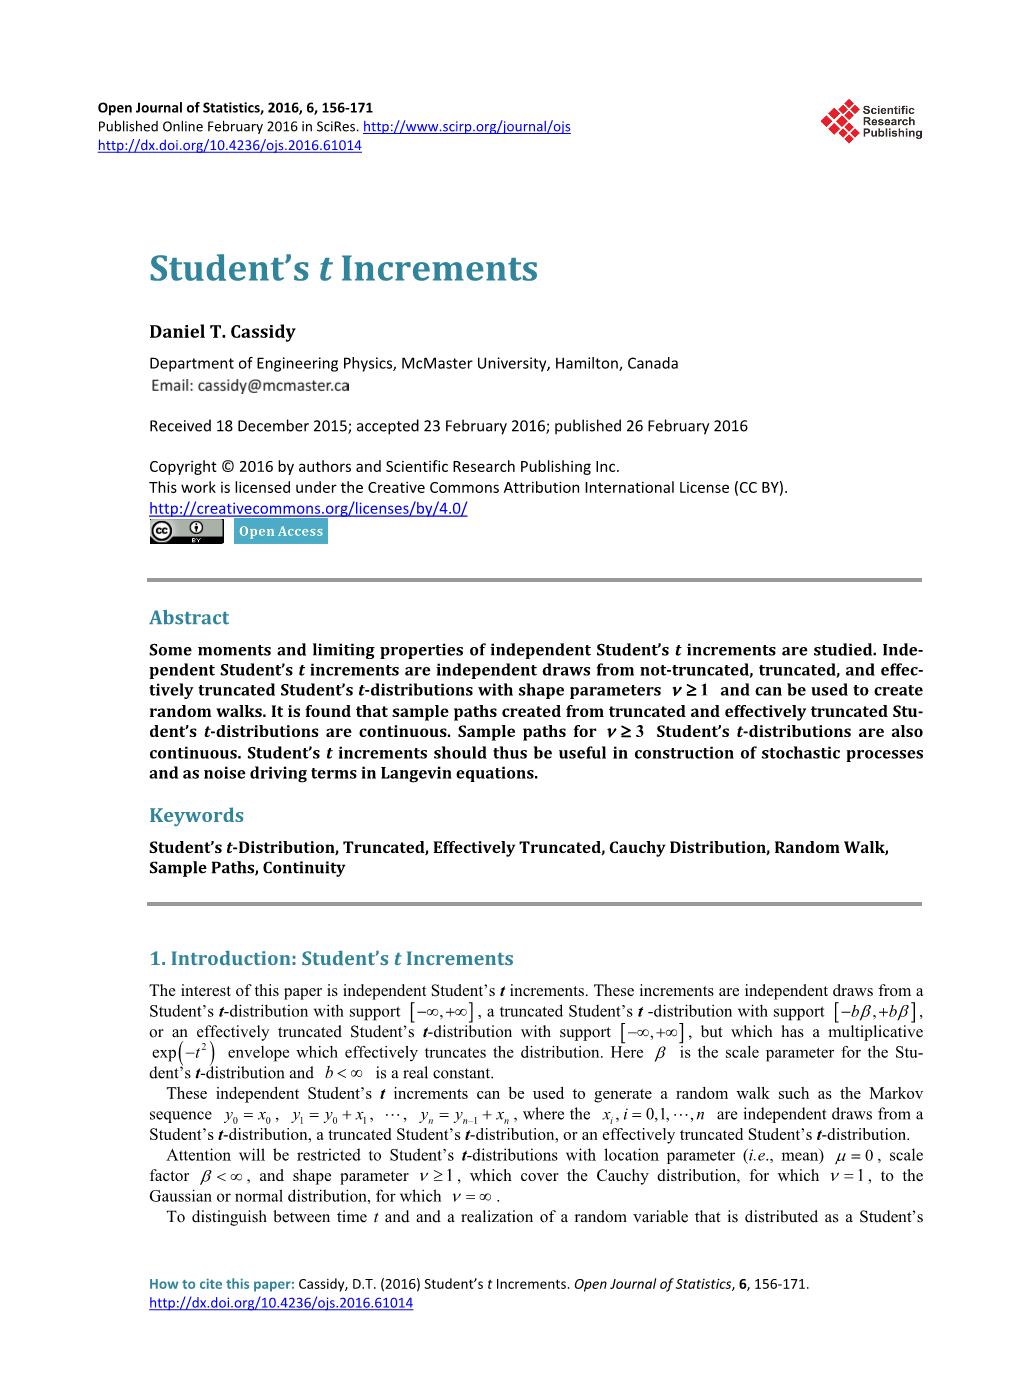 Student's T Increments